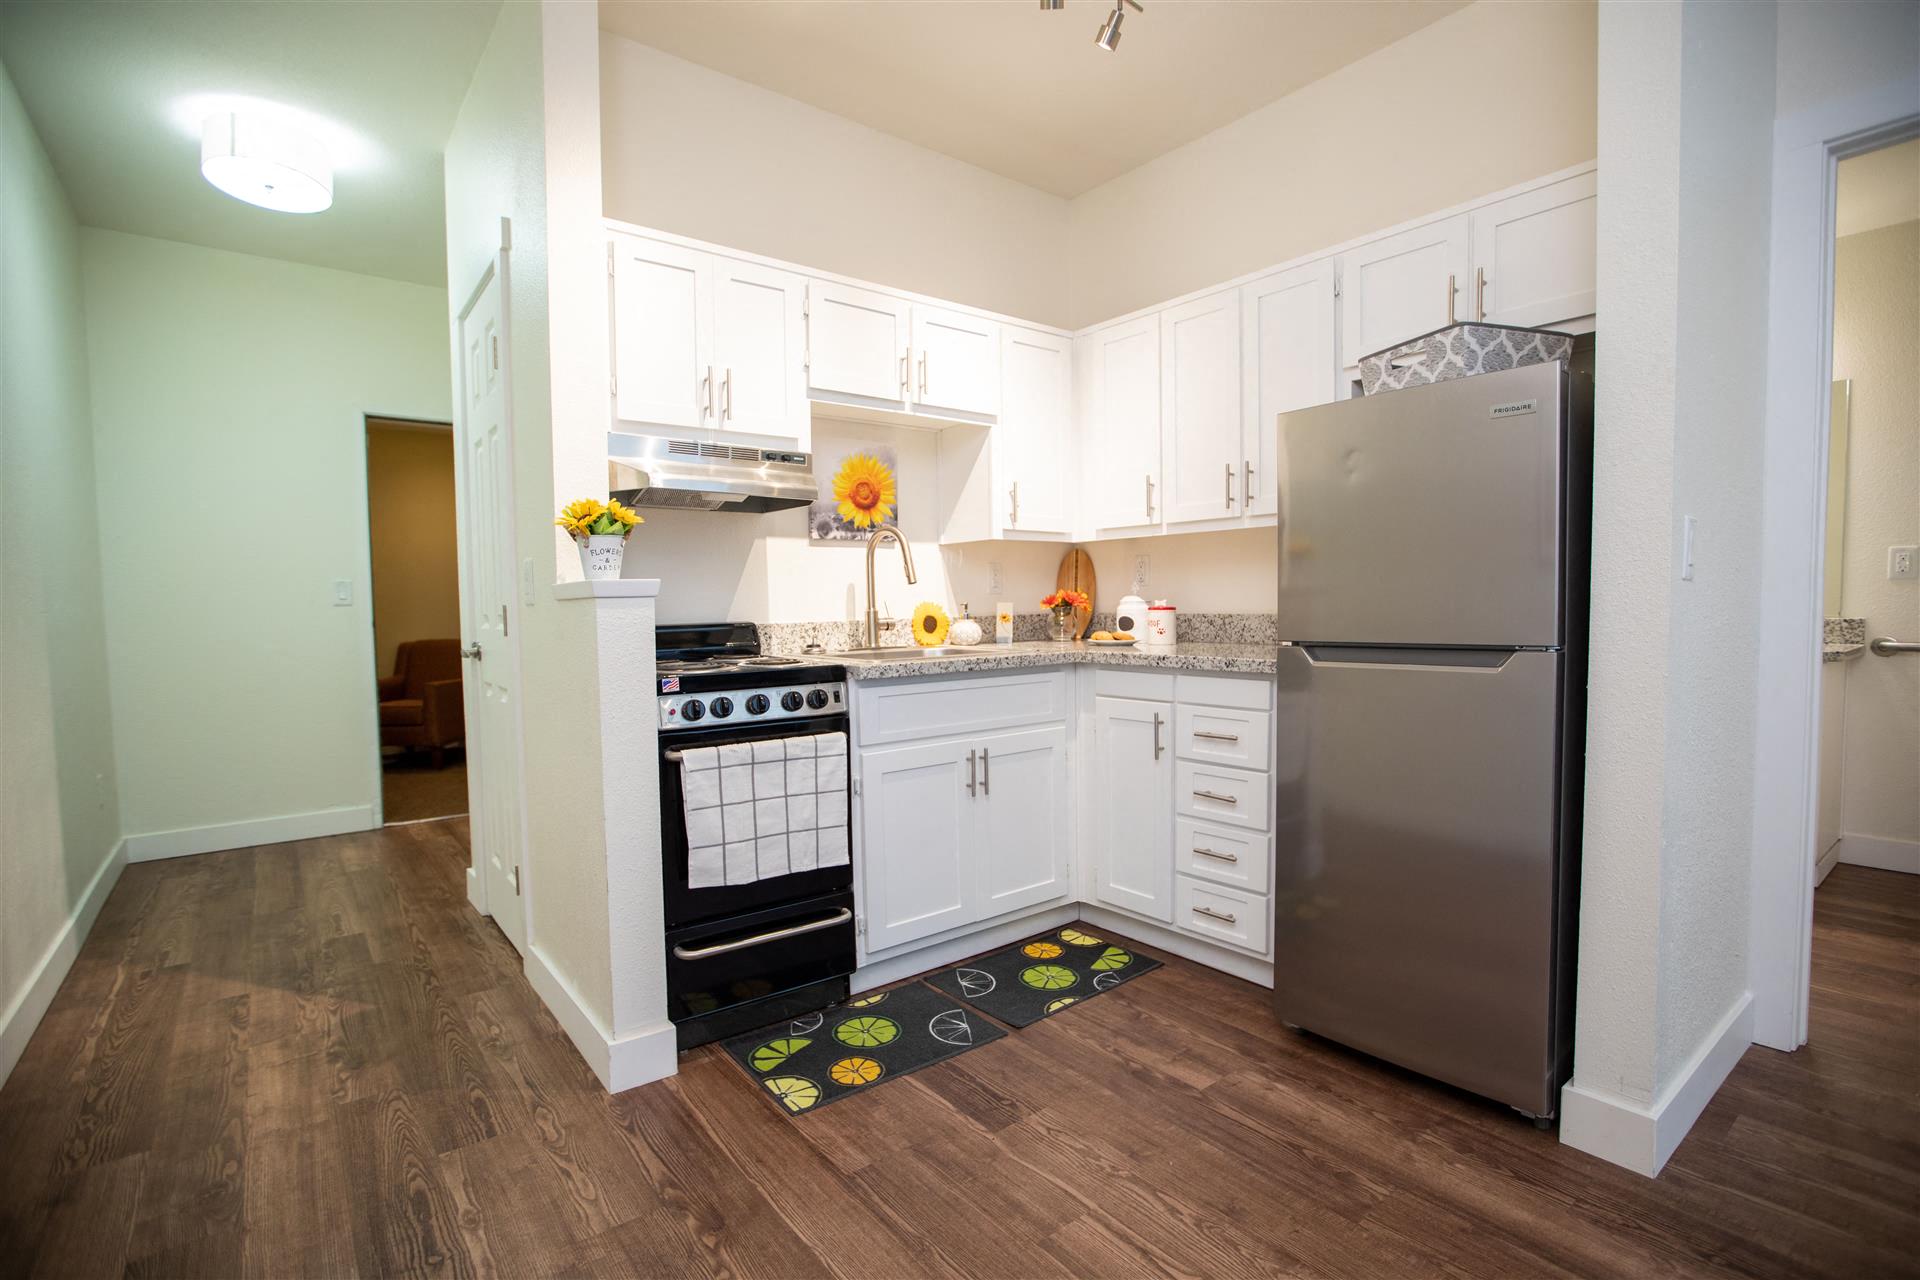 Kitchen cabinets and fridge at Cogir of Stock Ranch, Citrus Heights, CA, 95621